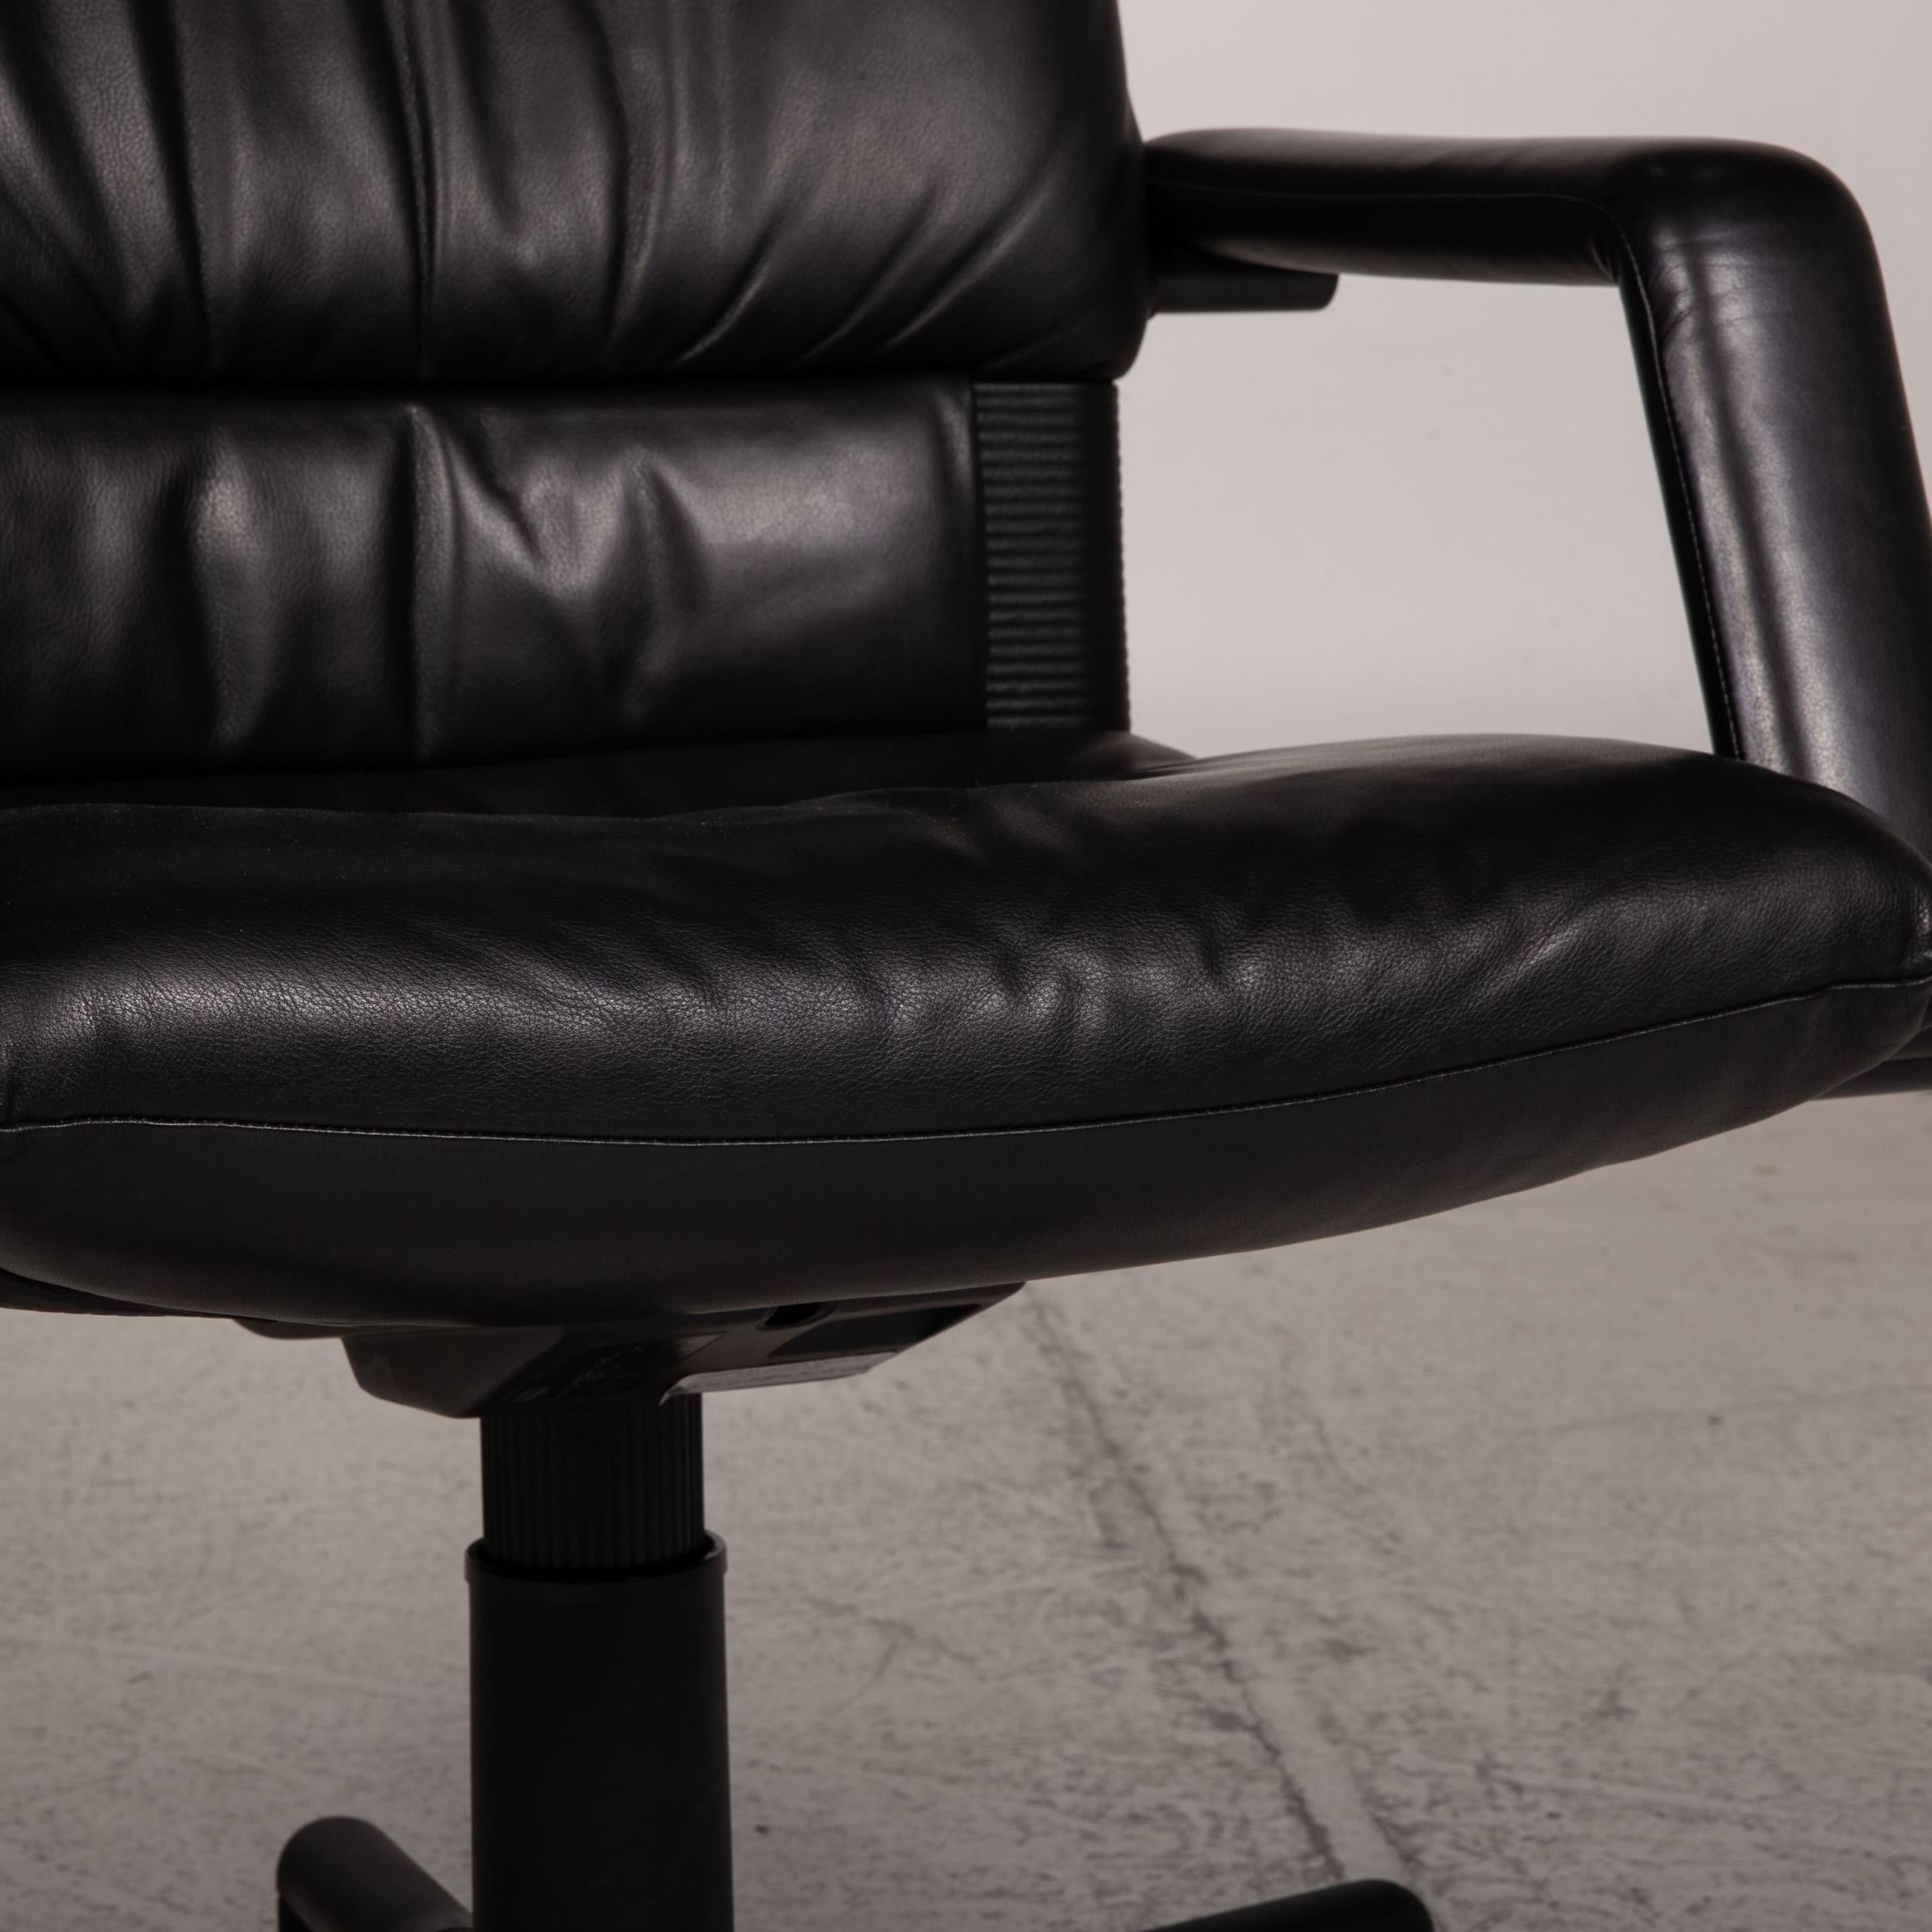 Modern Vitra Leather Chair Black Office Chair For Sale